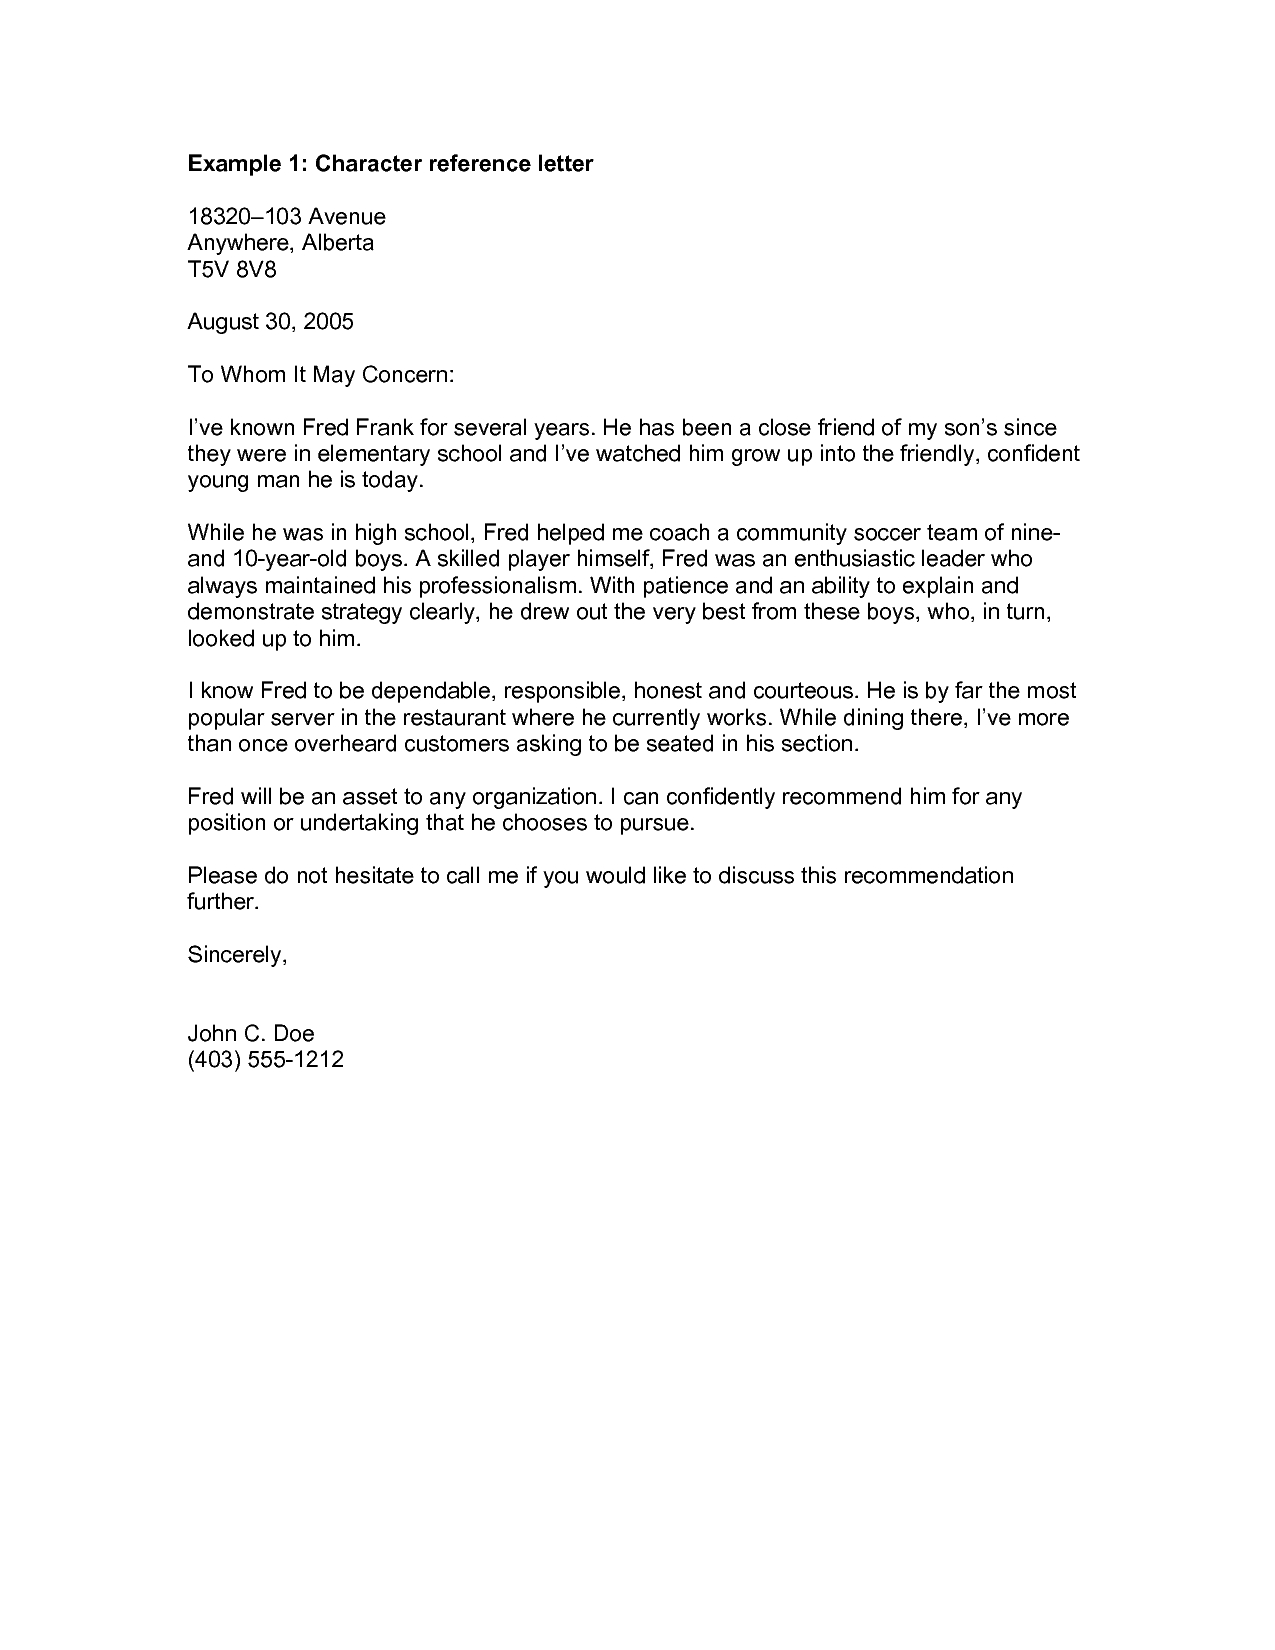 letter of recommendation for a friend template example-Re mendation Letter For A Friend Template OpengovpartnersorgLetter Re mendation Template Business Letter Sample 11-c